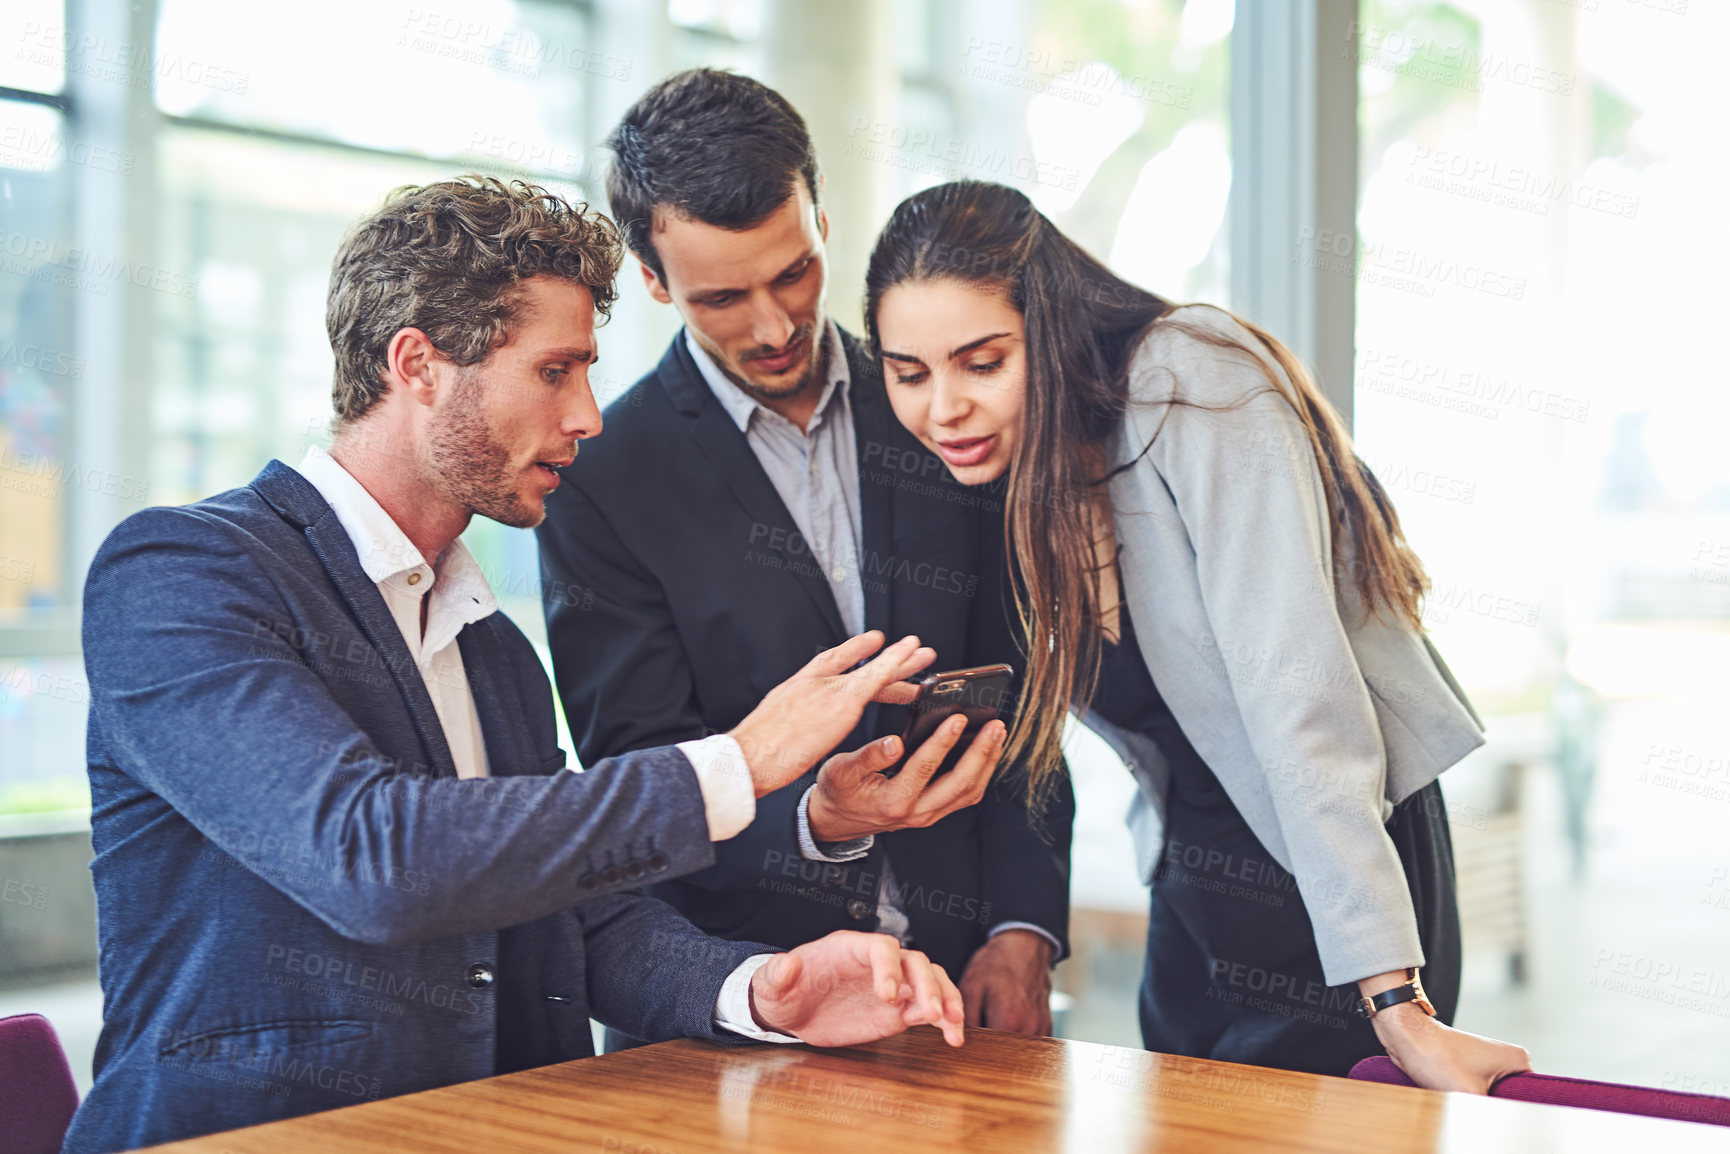 Buy stock photo Cropped shot of businesspeople using a cellphone together indoors